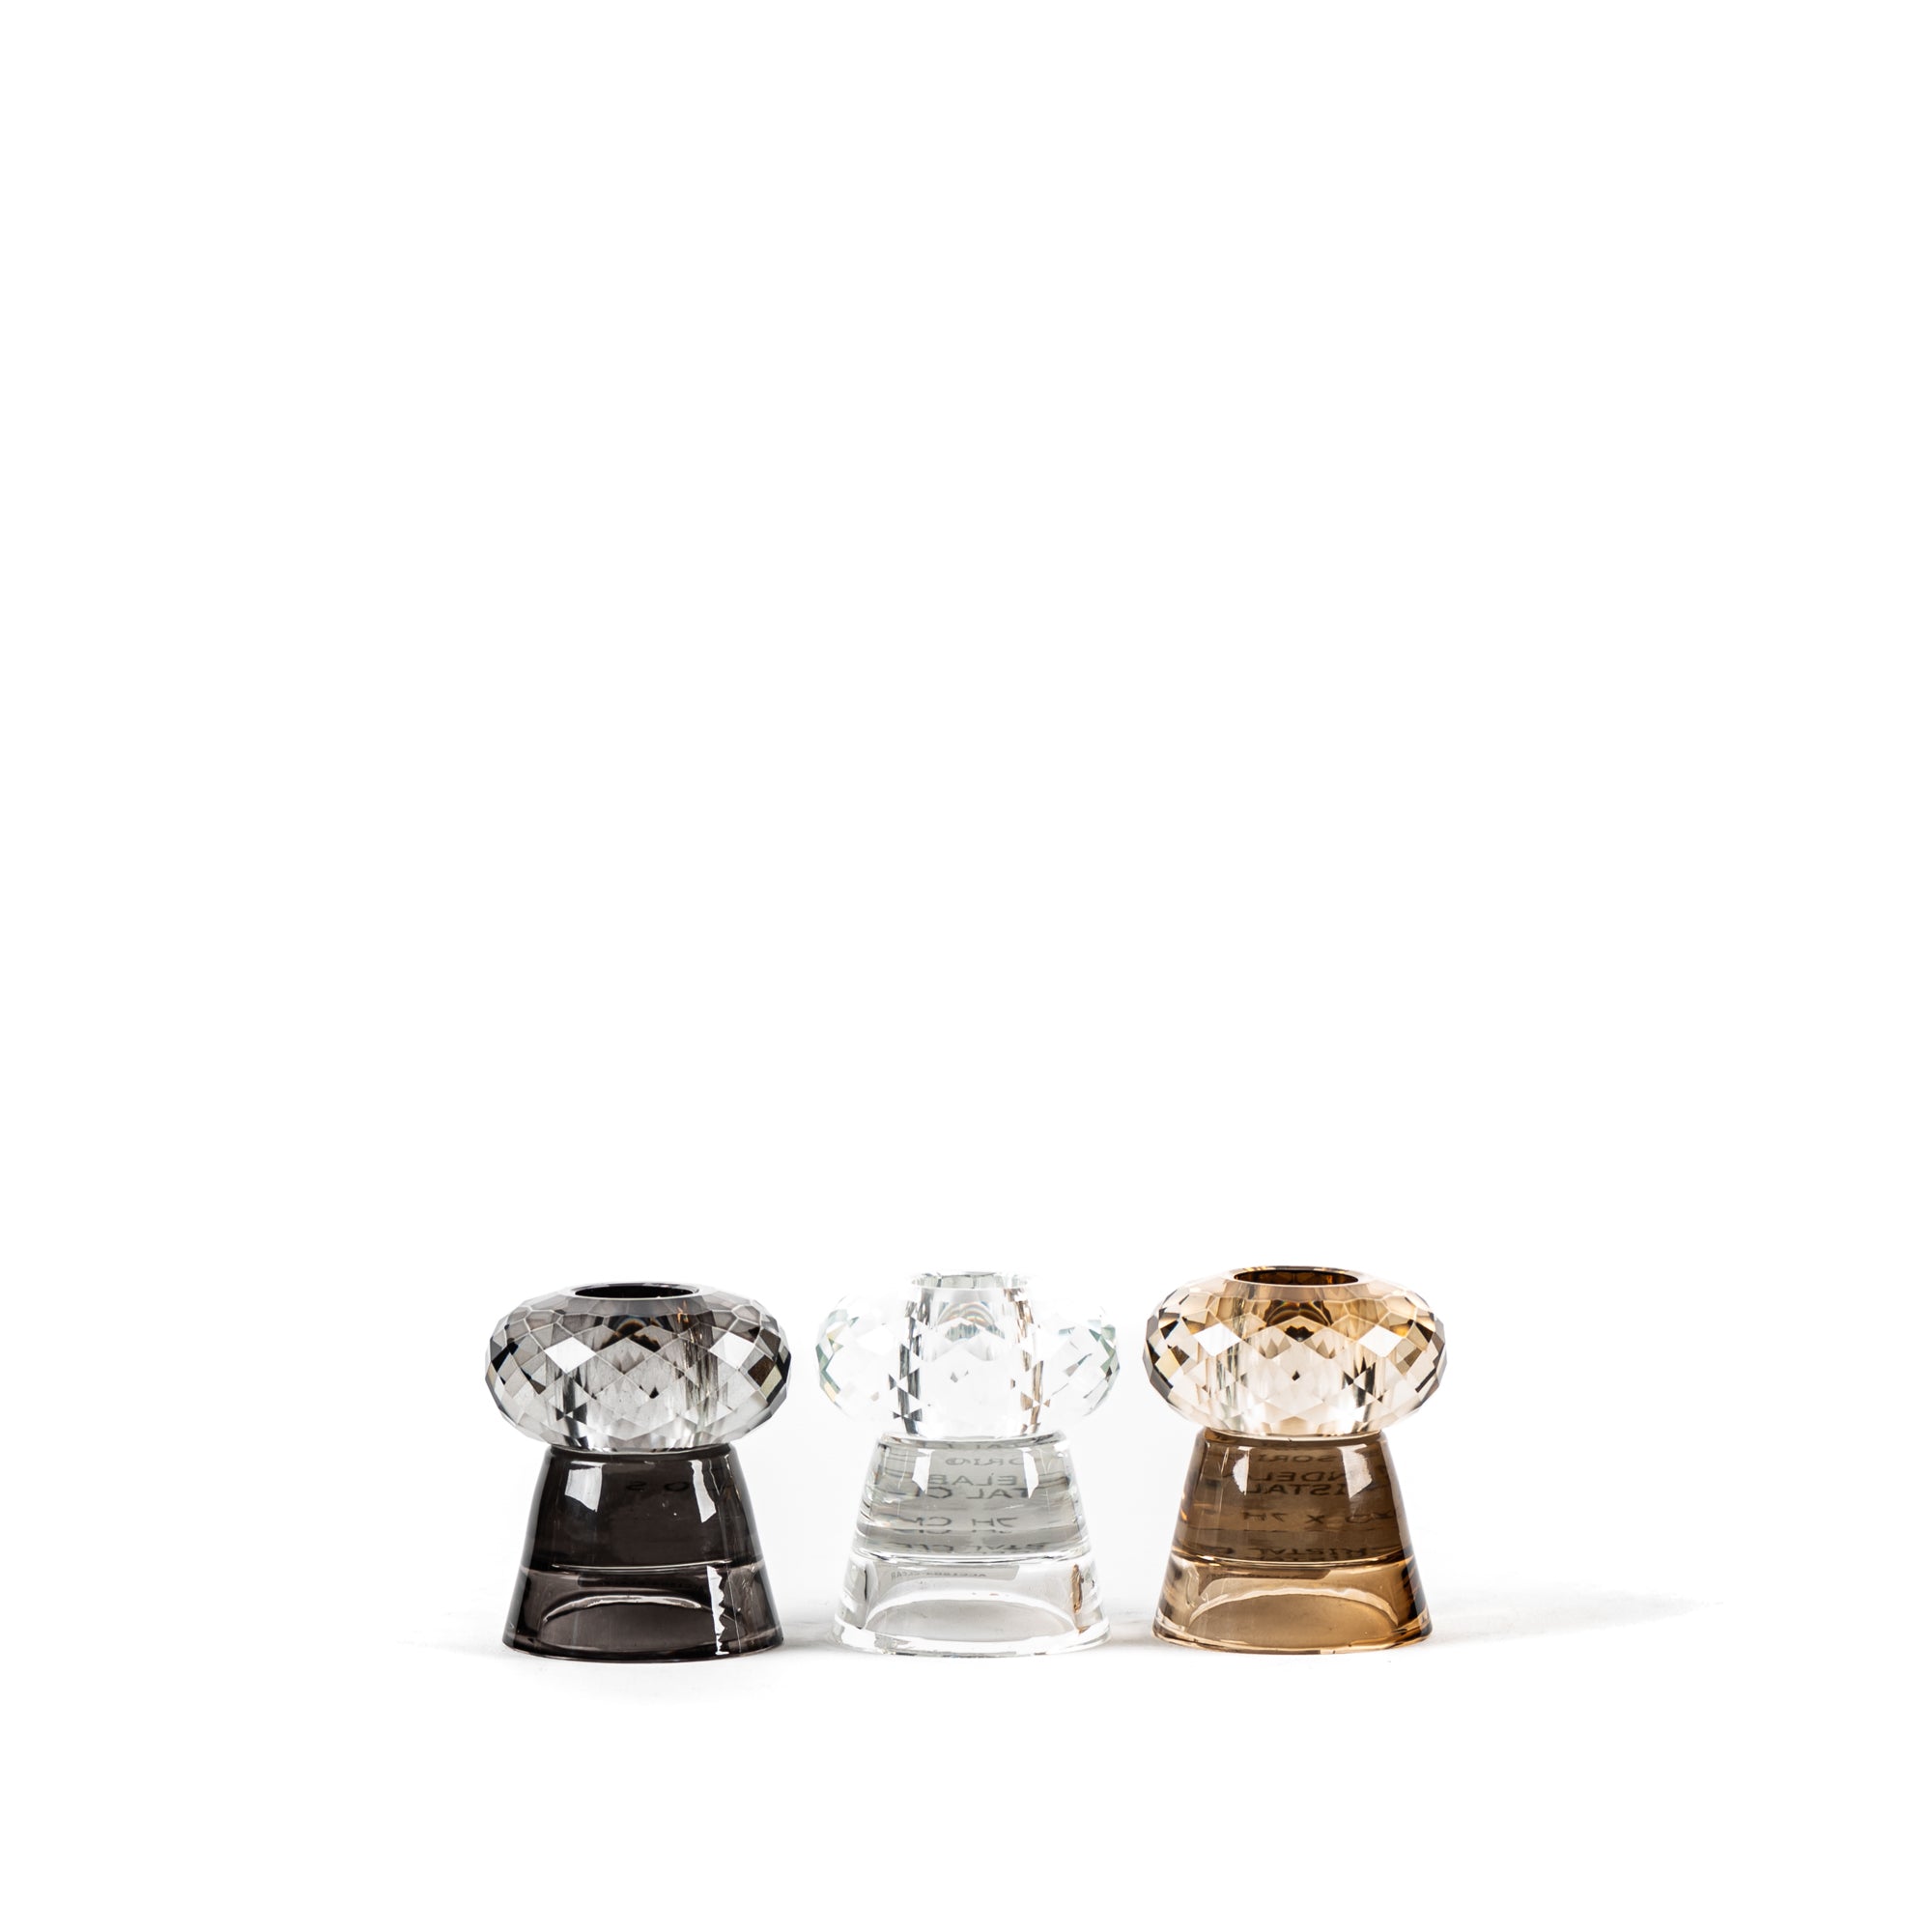 CANDELABRO | Duo S Crystal Clear Cristal